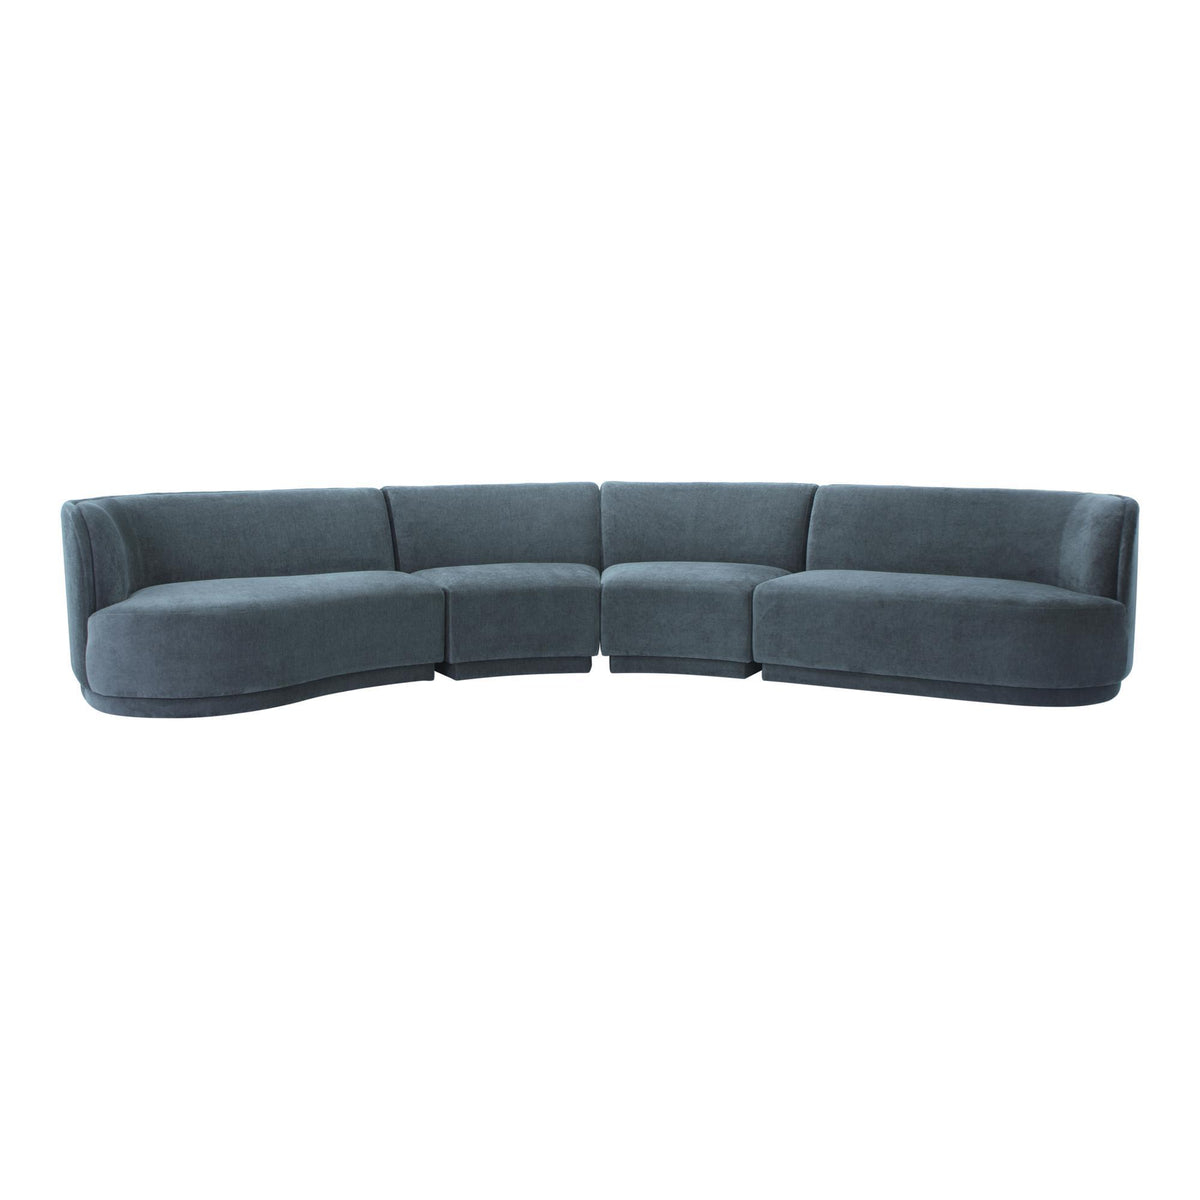 Moe's Home Collection Yoon Eclipse Modular Sectional Chaise Left Nightshade Blue - JM-1024-45